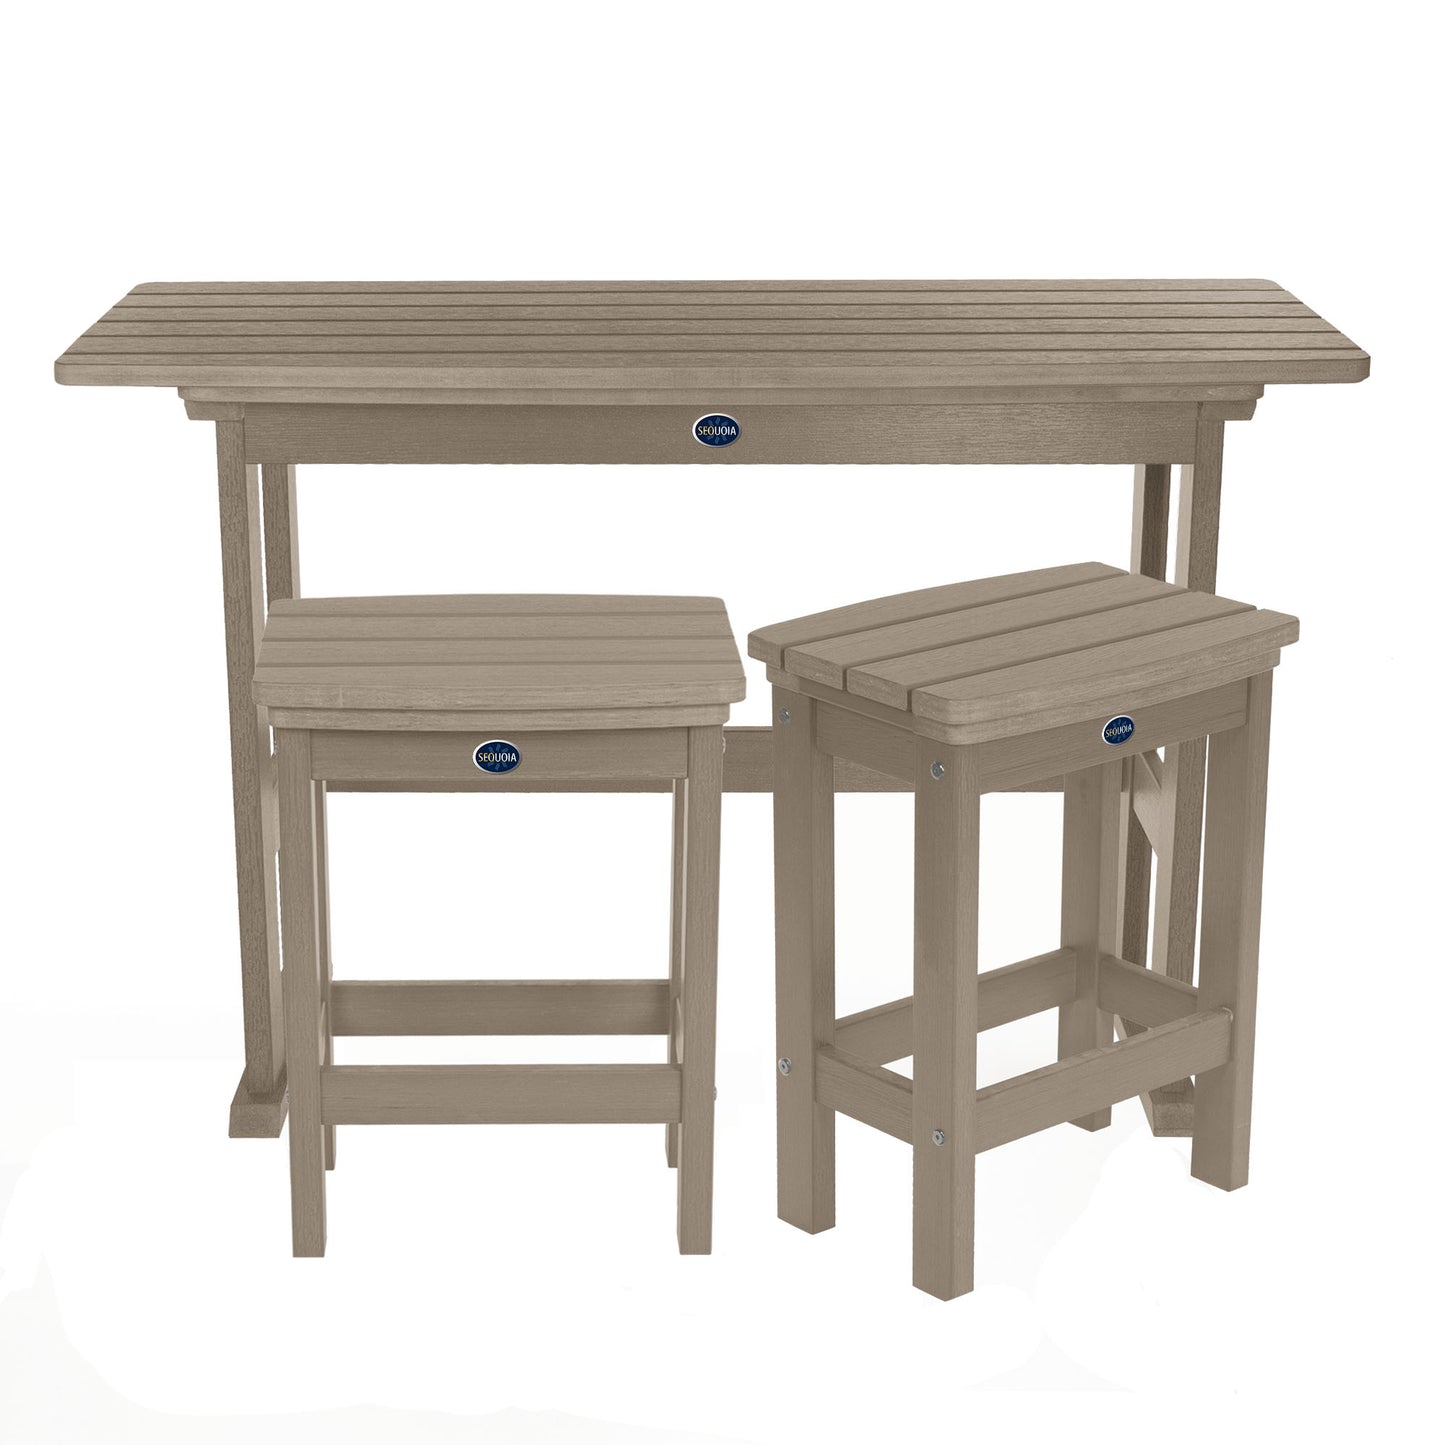 Blue Ridge 3 piece counter height balcony set in Woodland Brown